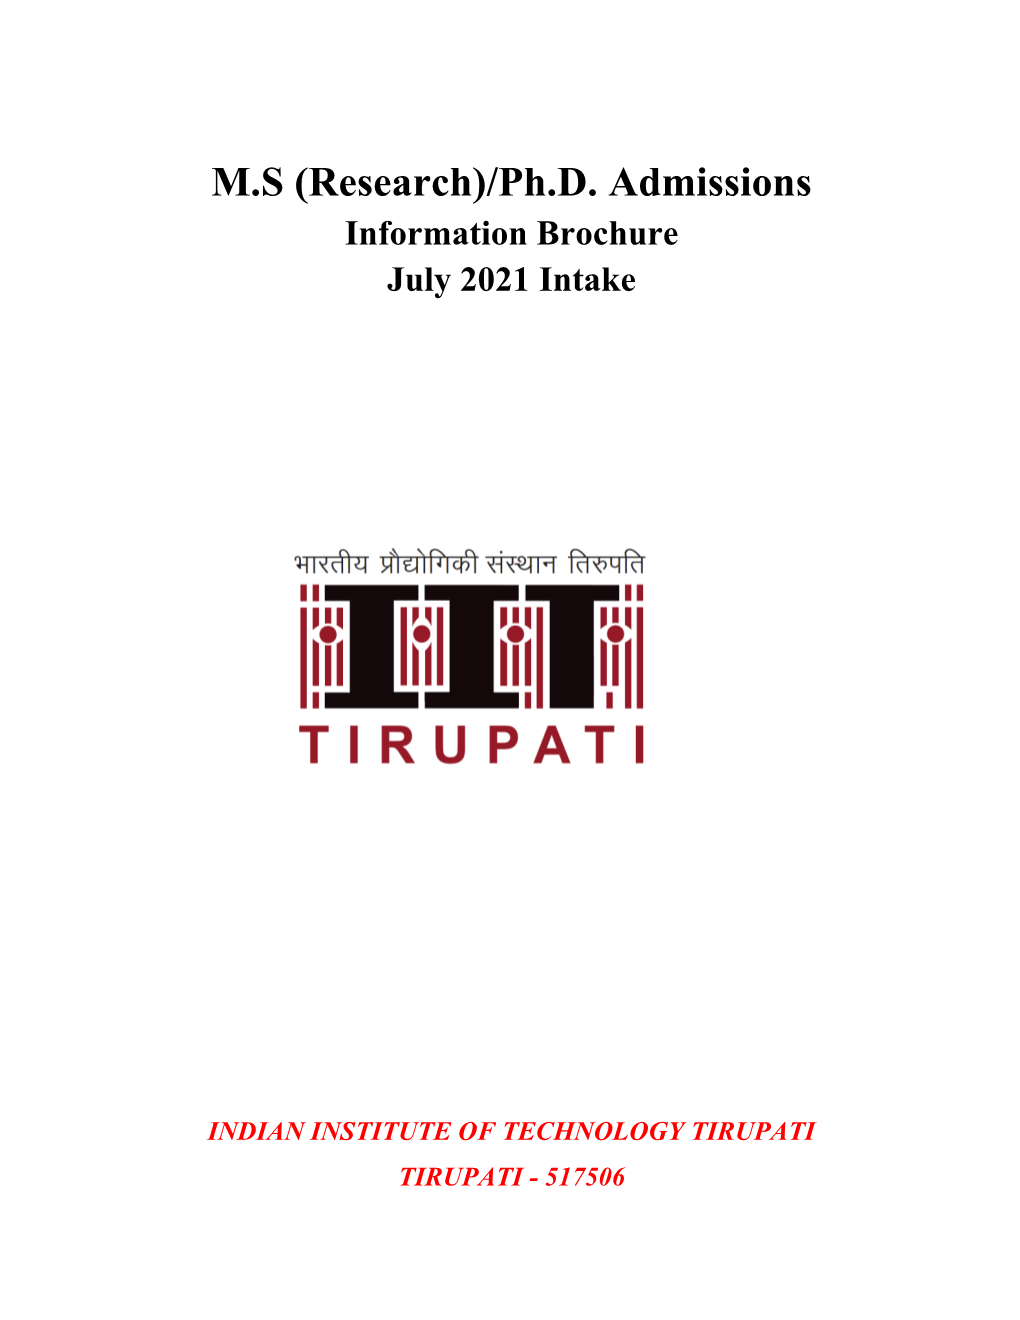 M.S (Research)/Ph.D. Admissions Information Brochure July 2021 Intake